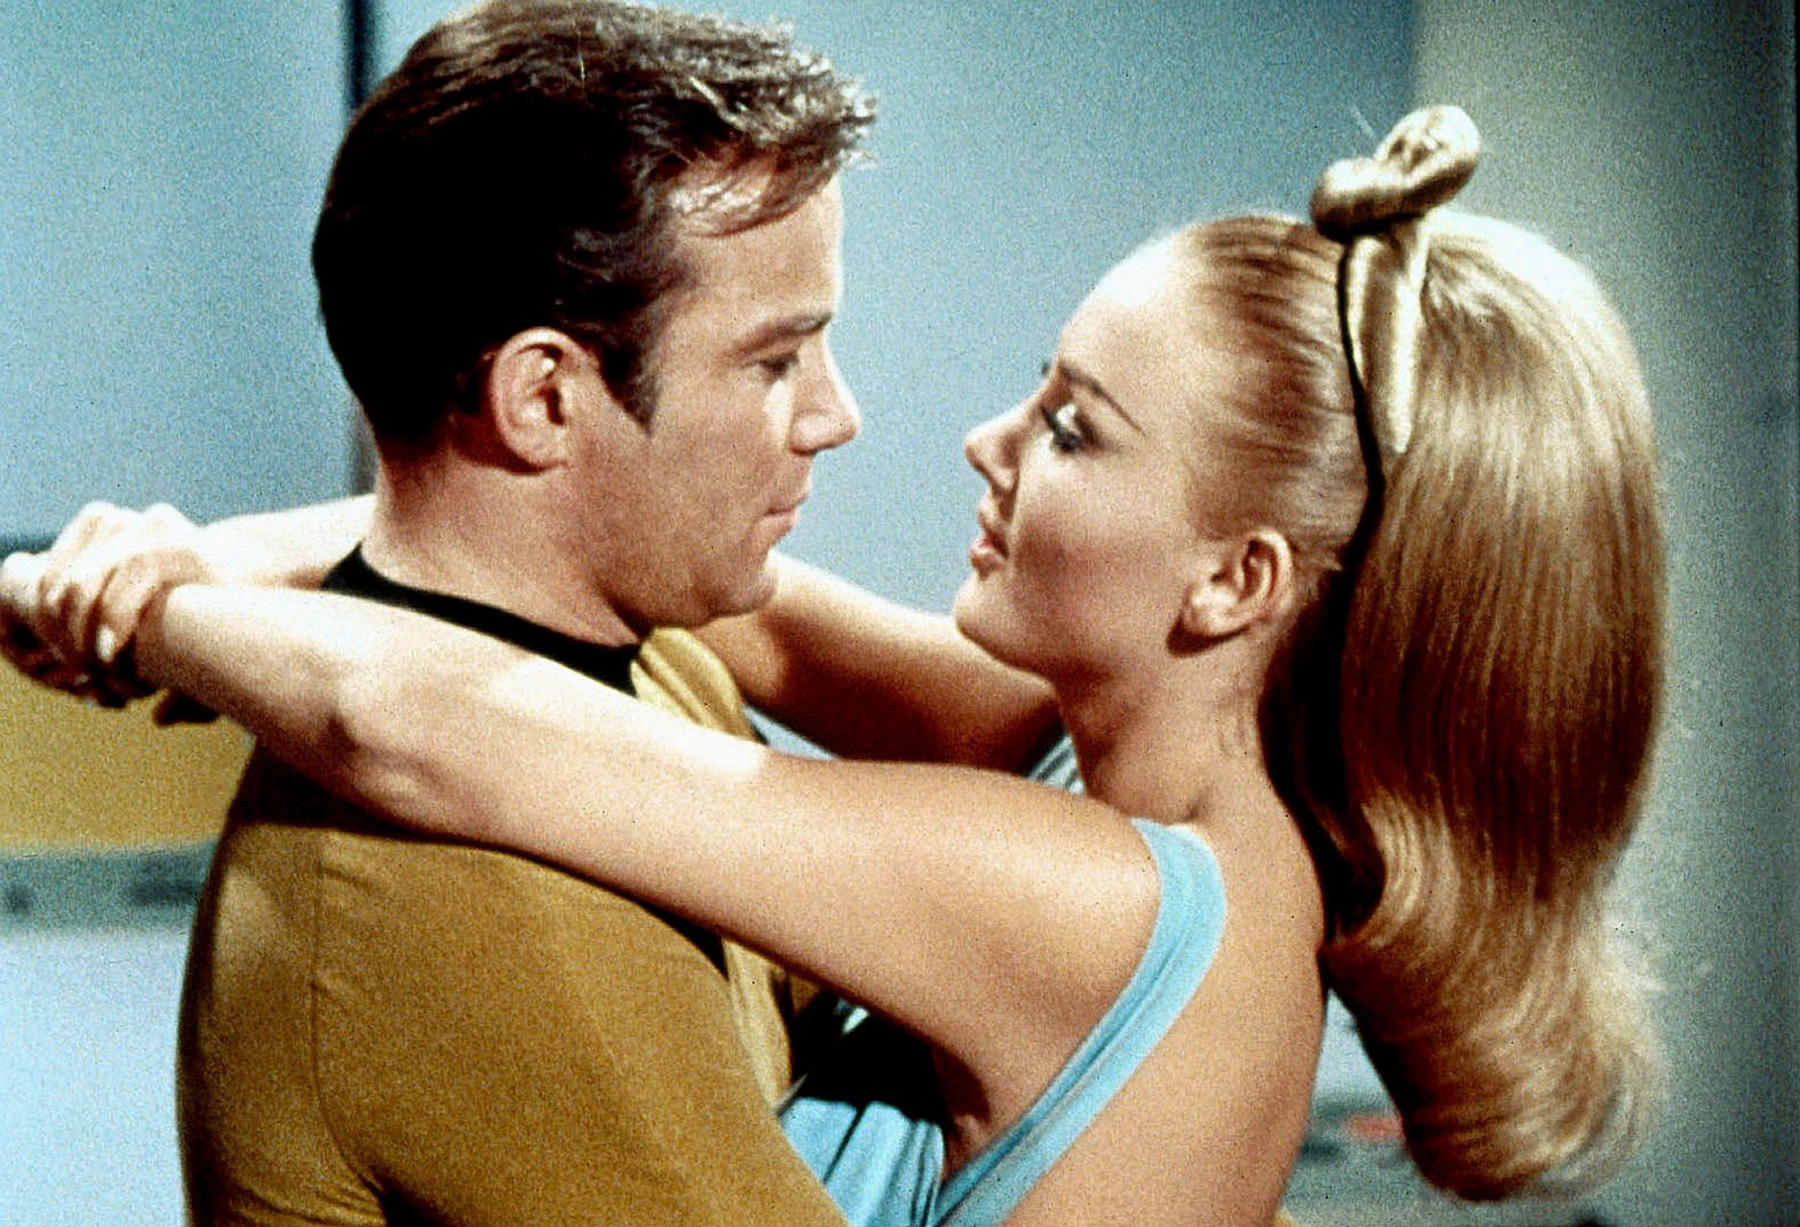 William Shatner and Barbara Bouchet in “By Any Other Name”(1968).